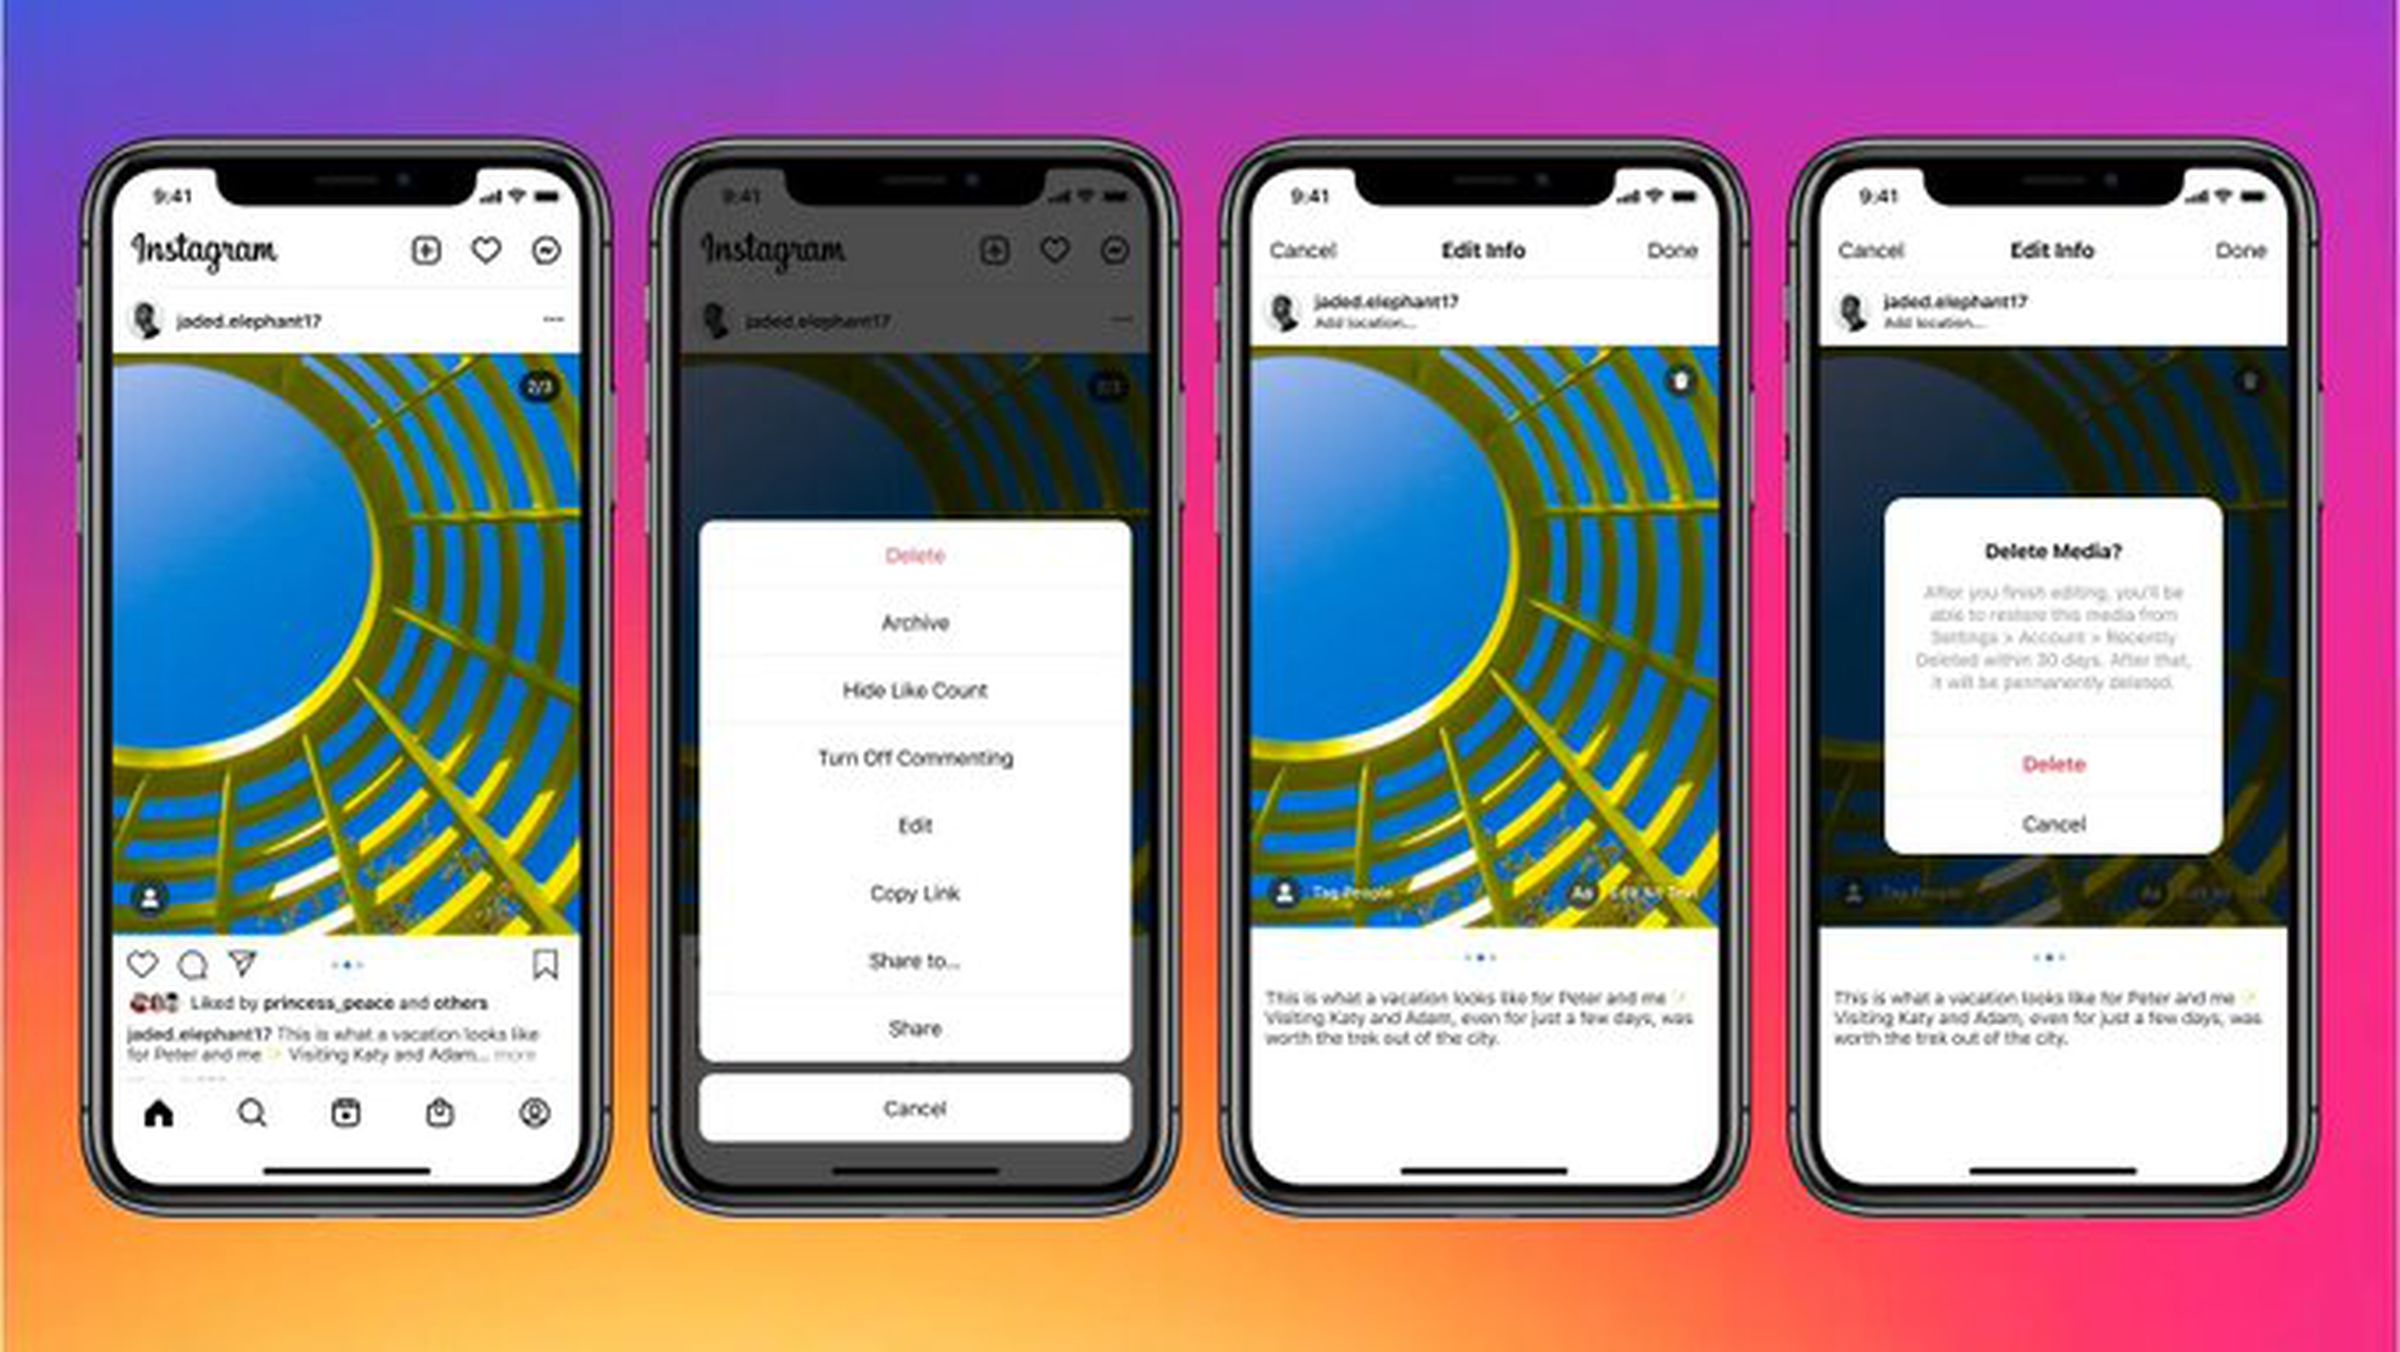 Users can now remove a single photo or video from a multi-feed Instagram post